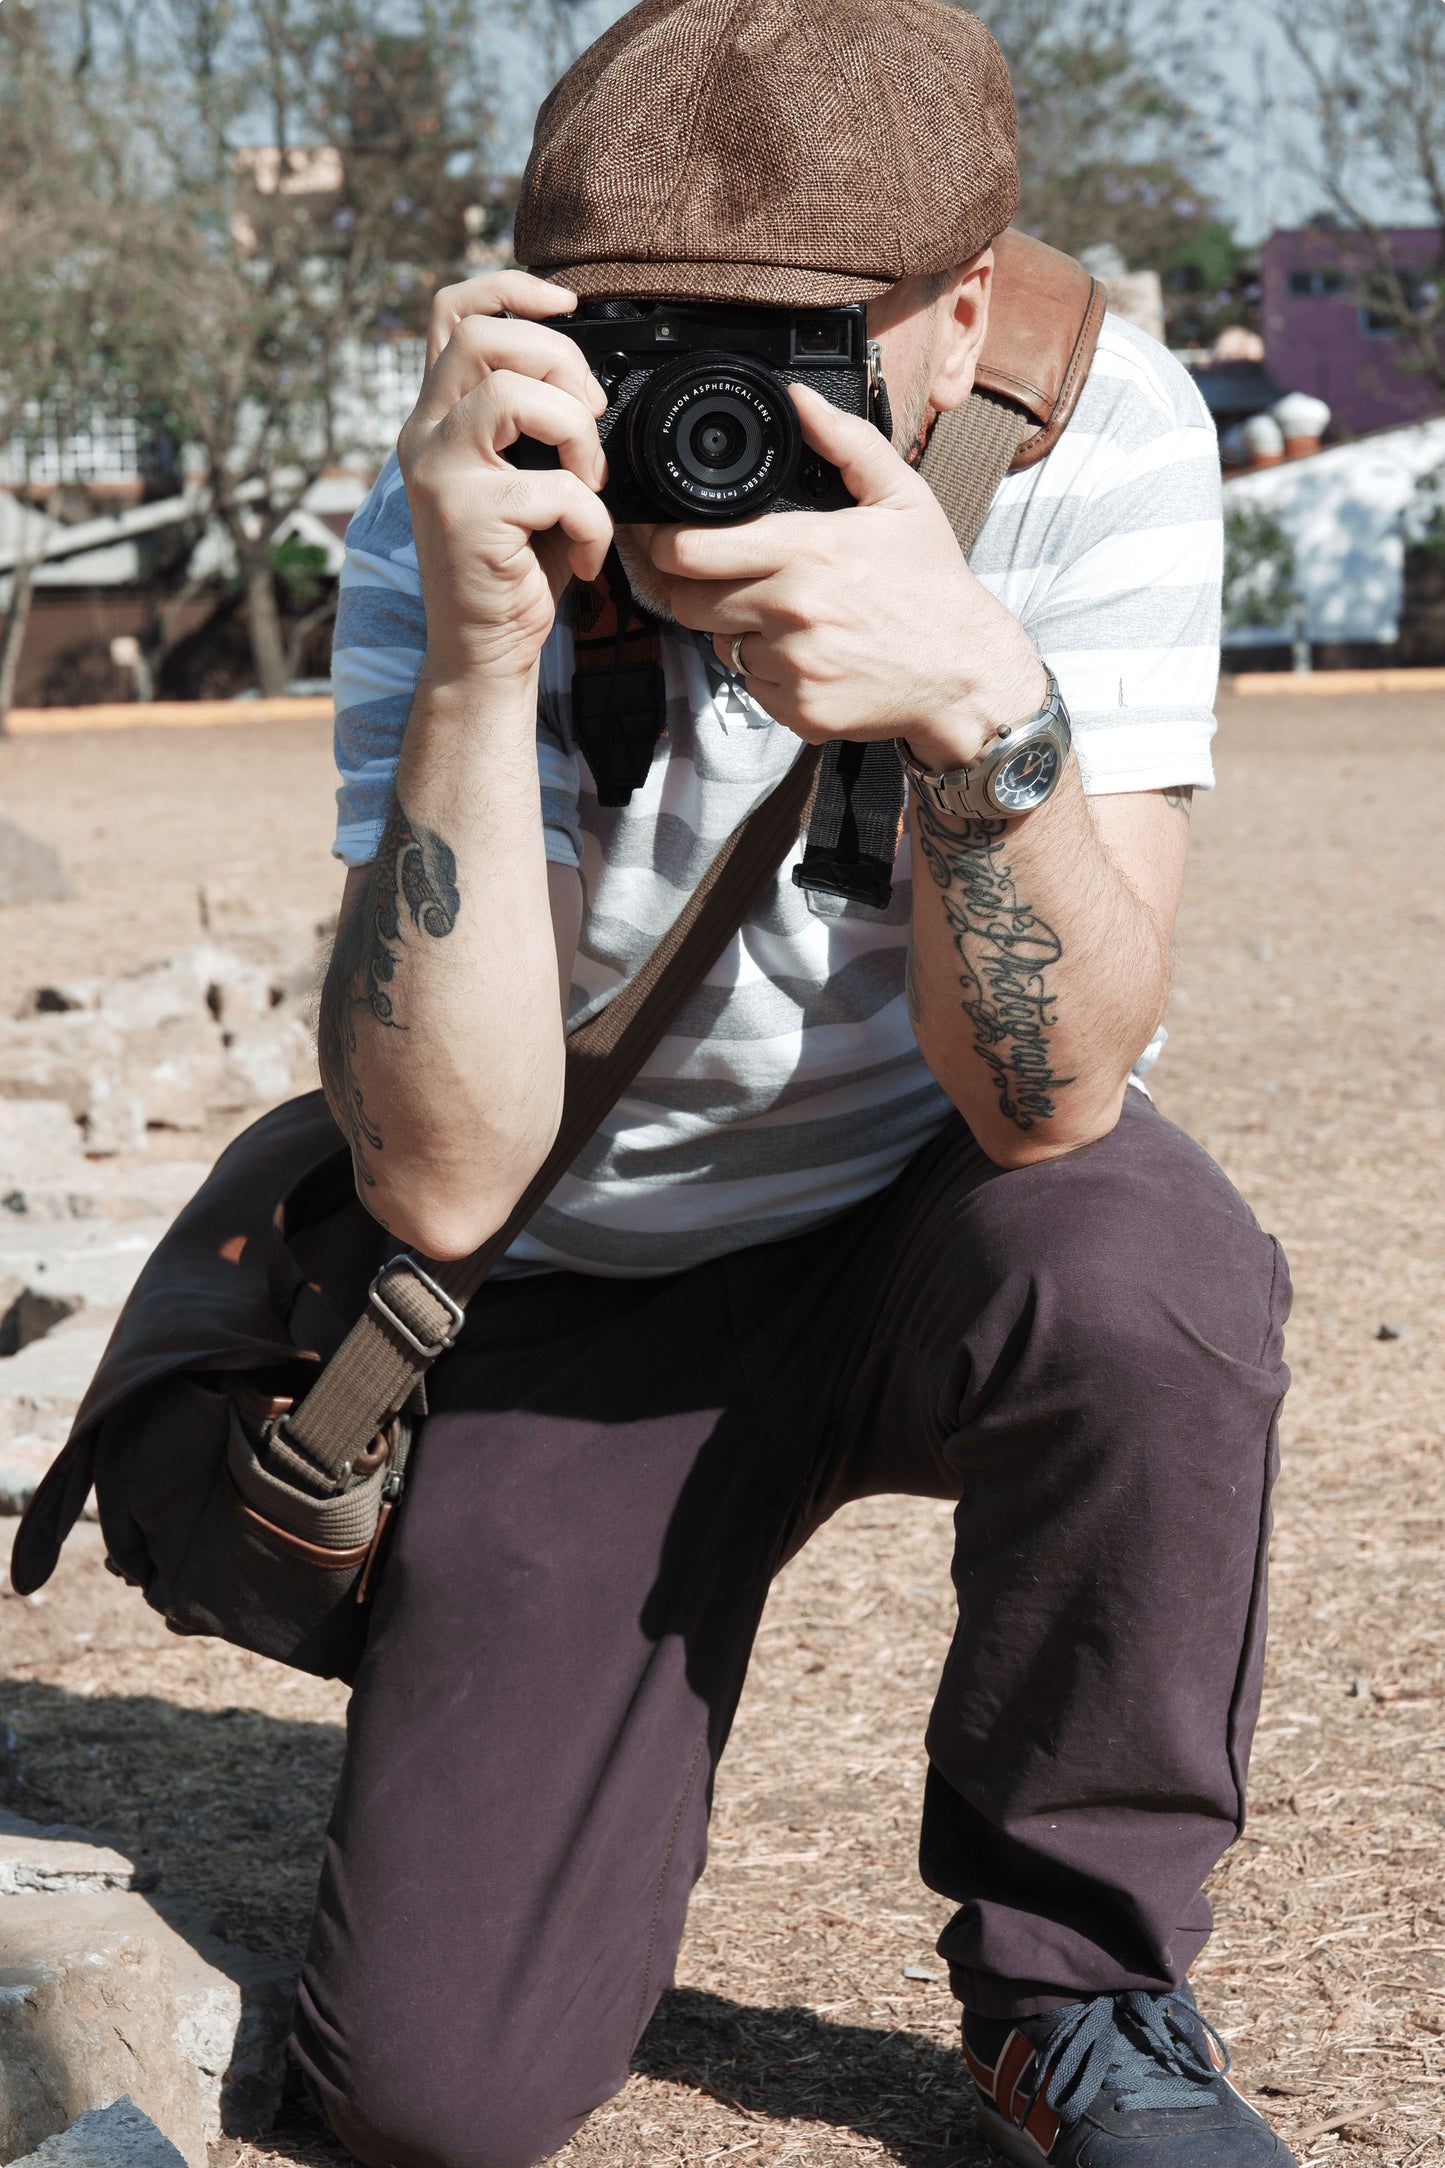 A photographer crouching down facing you, and holding a camera and taking your photo, wearing a messenger bag